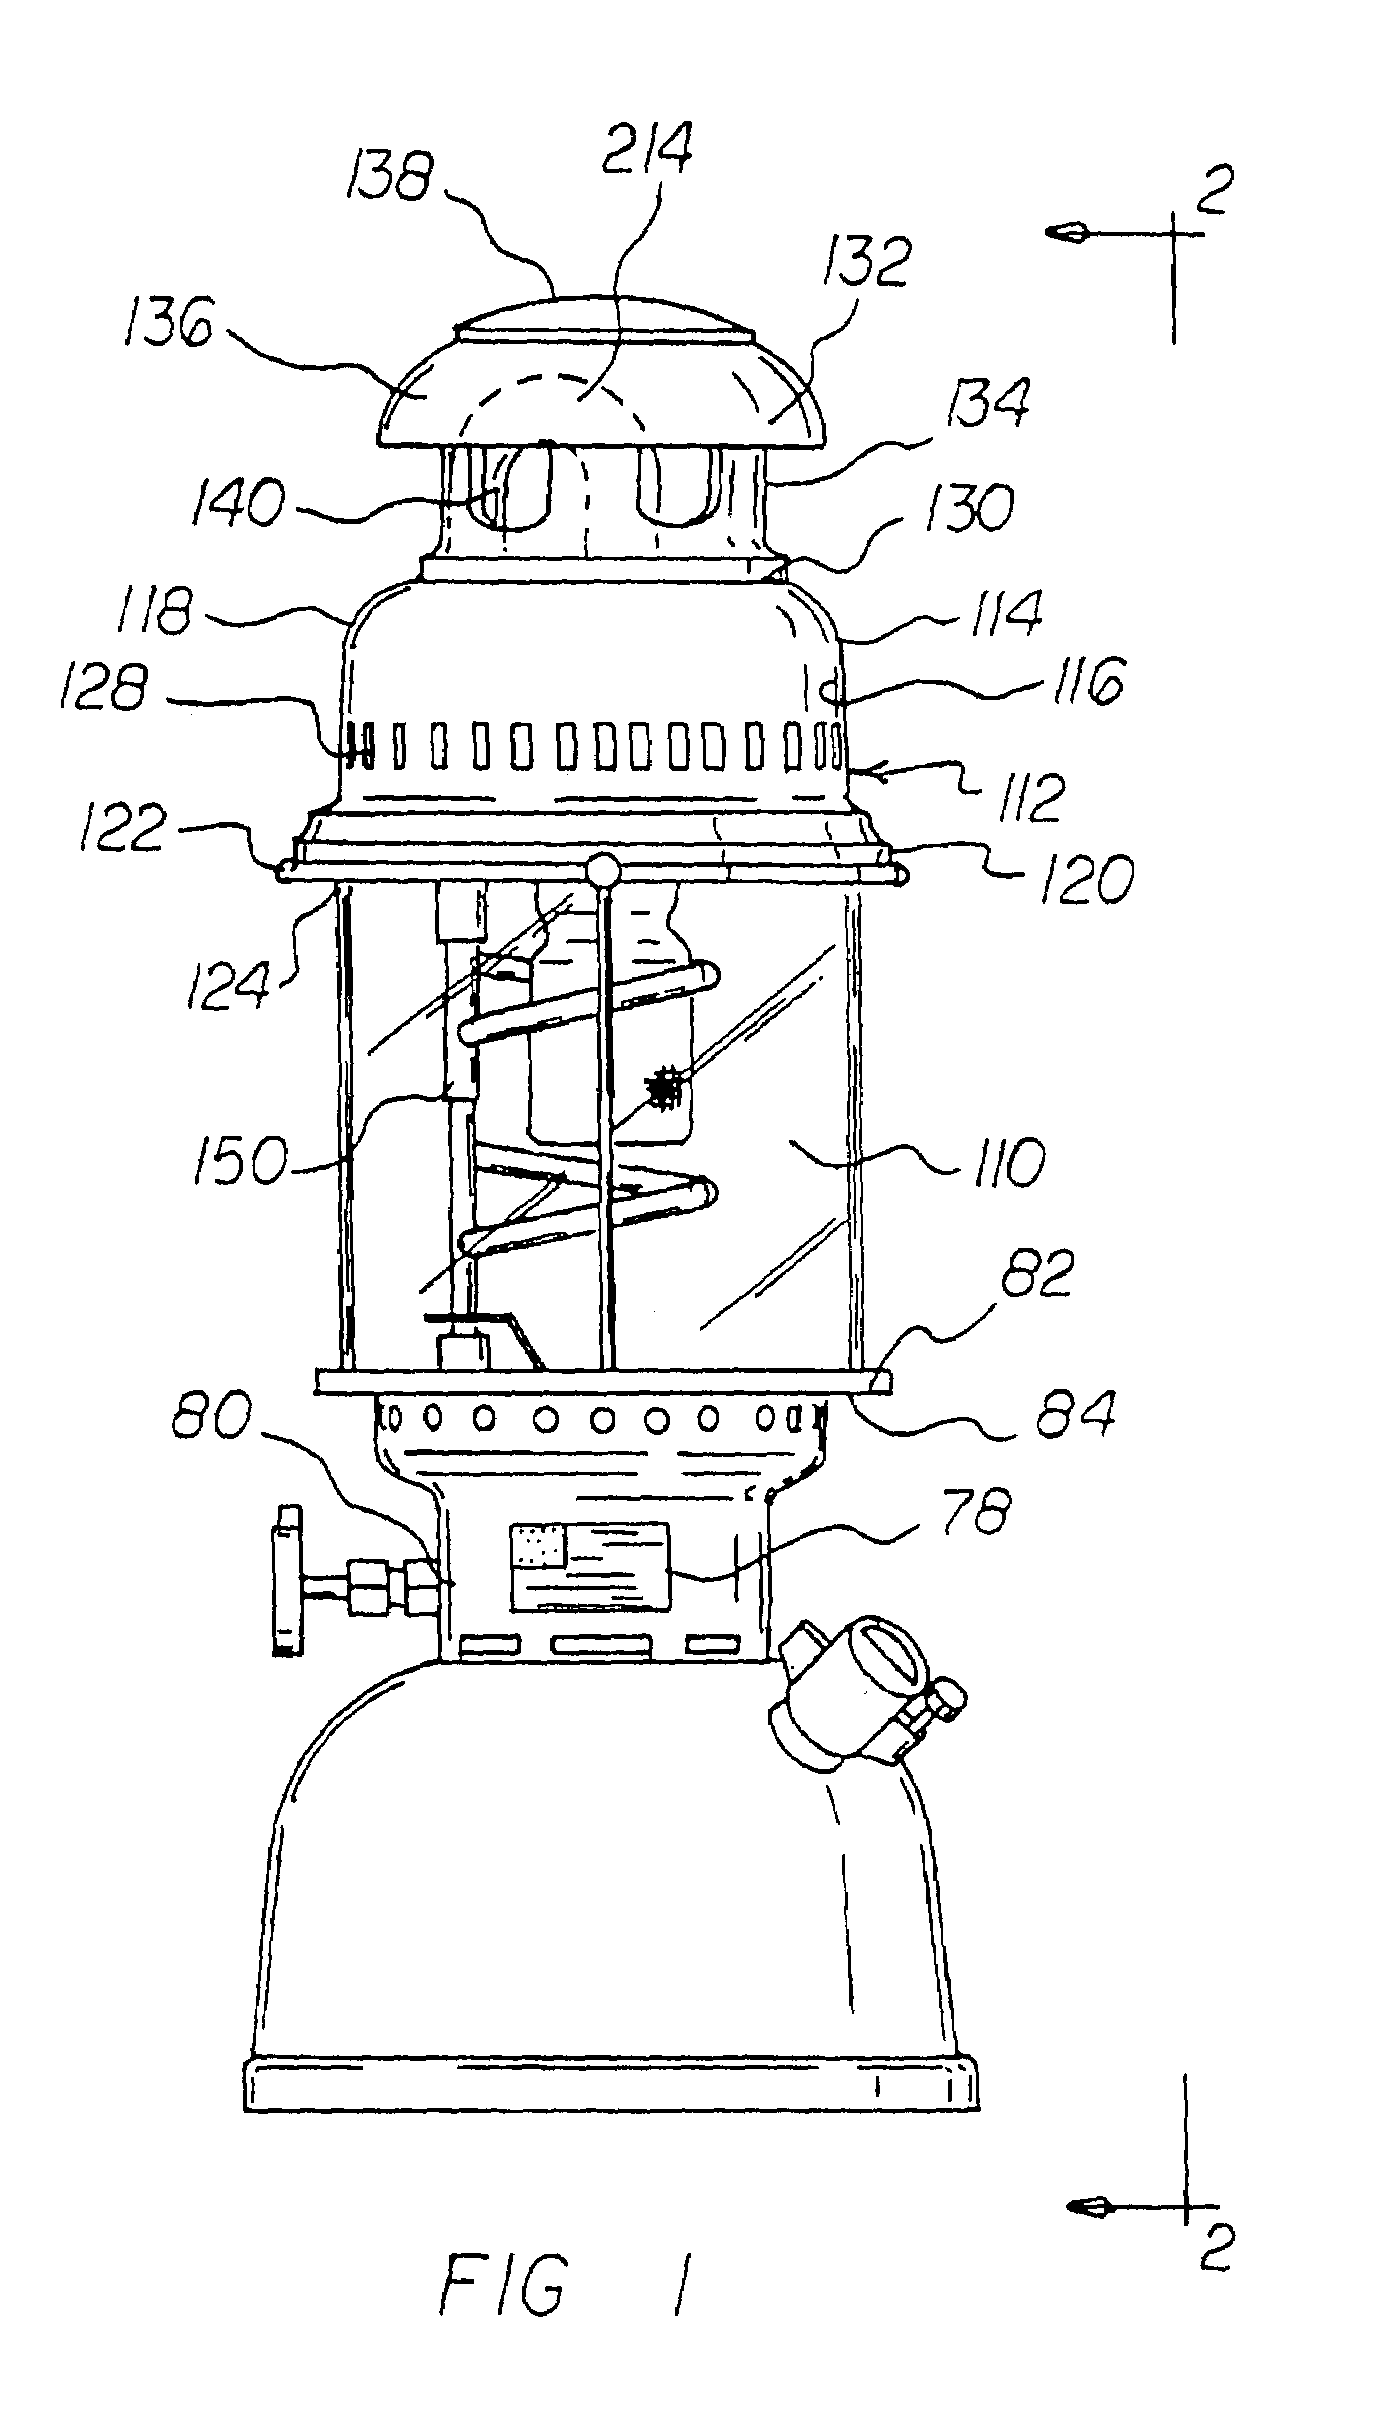 Lantern and fuel system